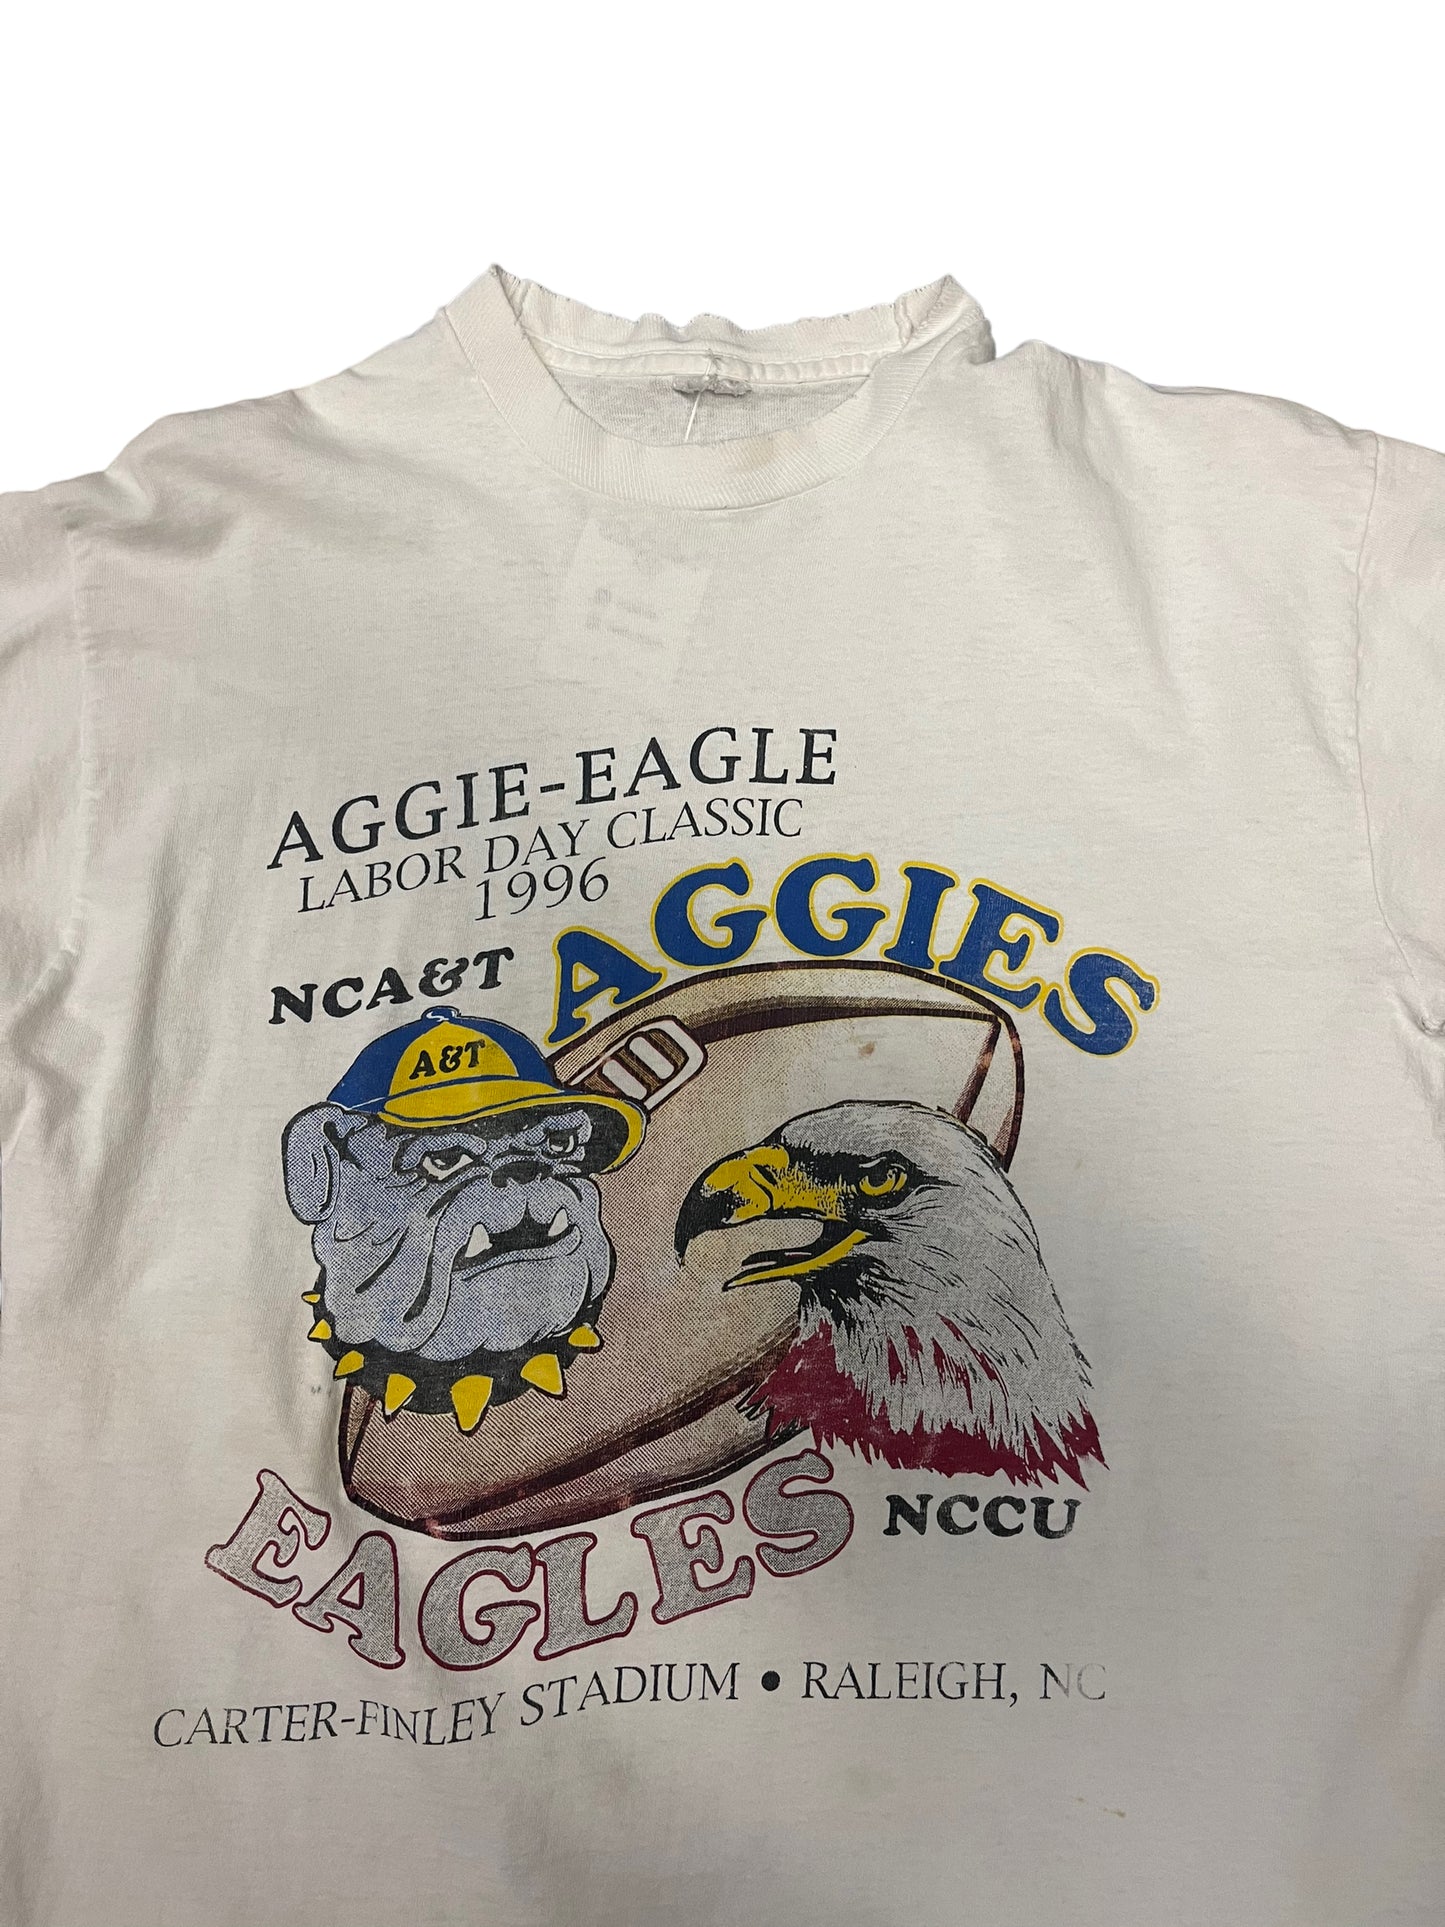 (L) 1996 Aggies vs Eagles Football Classic Double Sided Tee